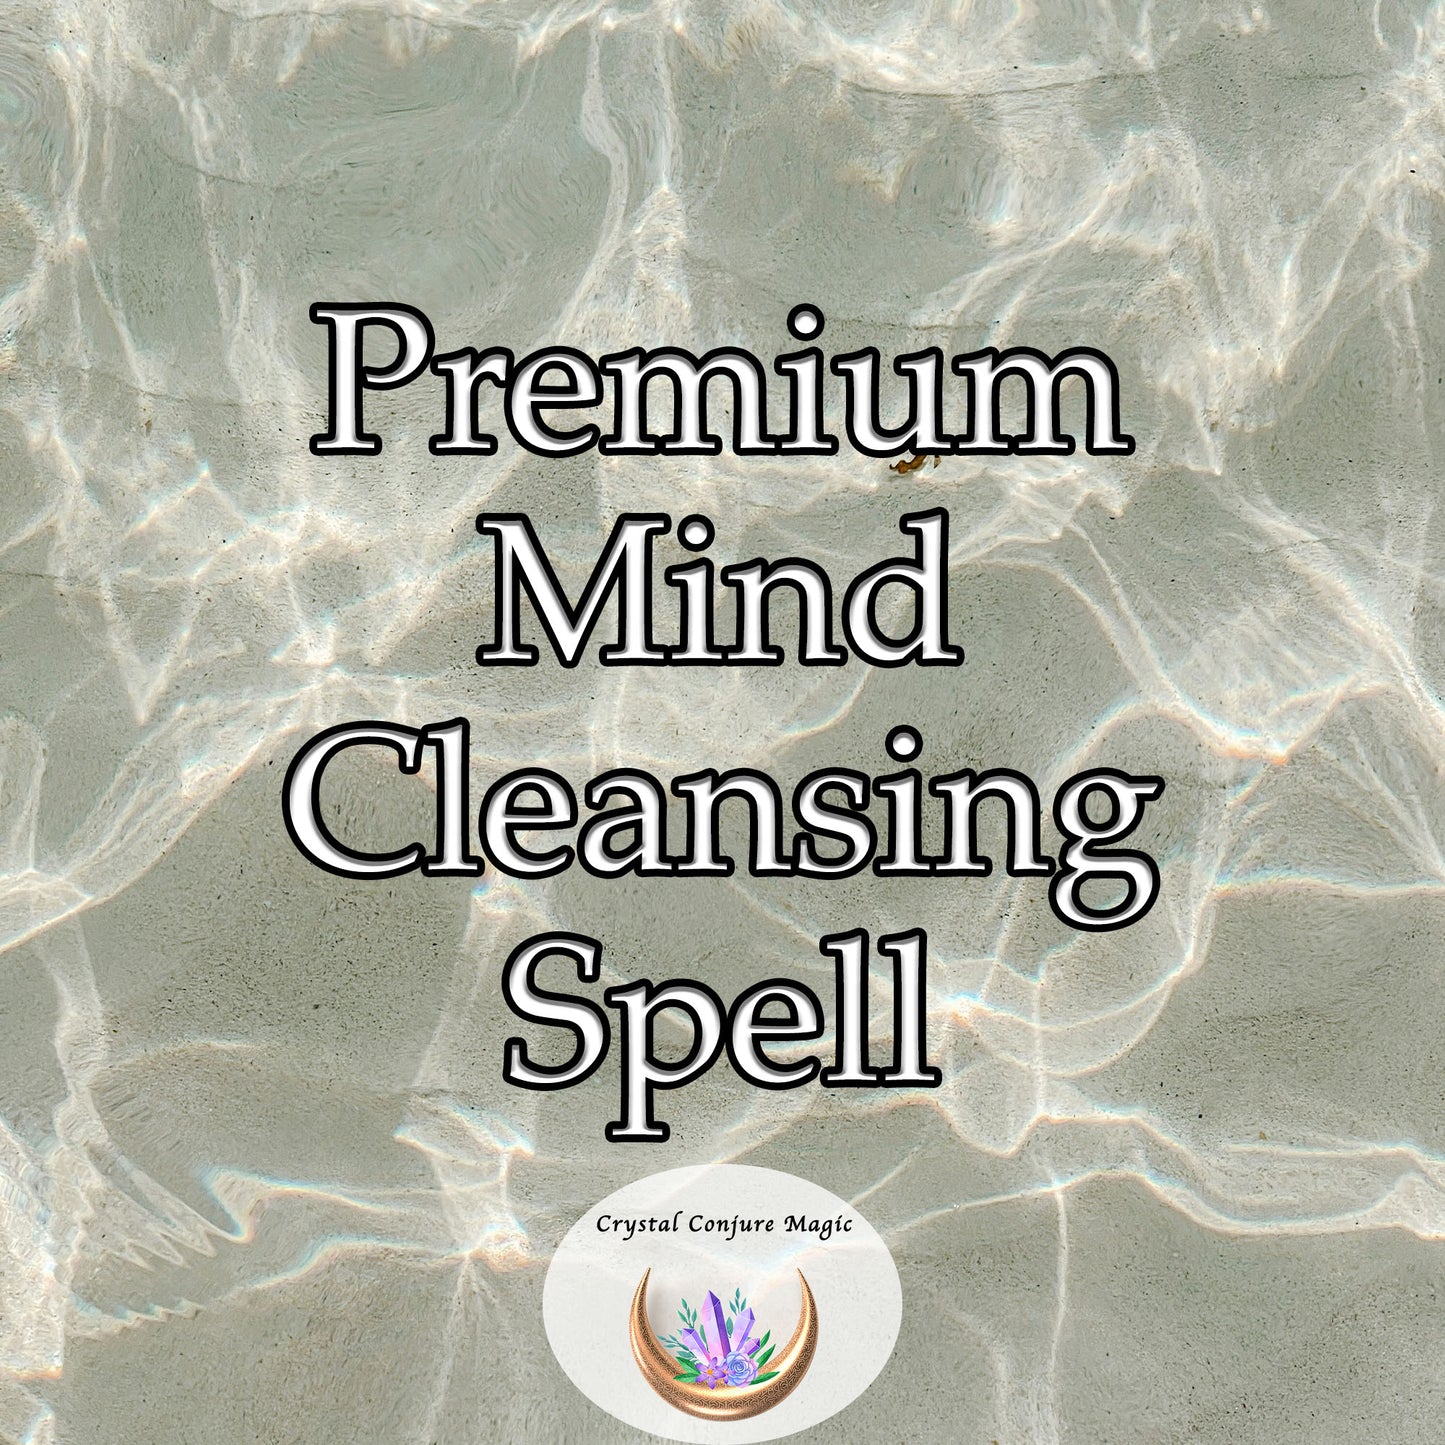 Premium  Mind Cleansing Spell - experience a clear, focused mind, and unlock your full potential